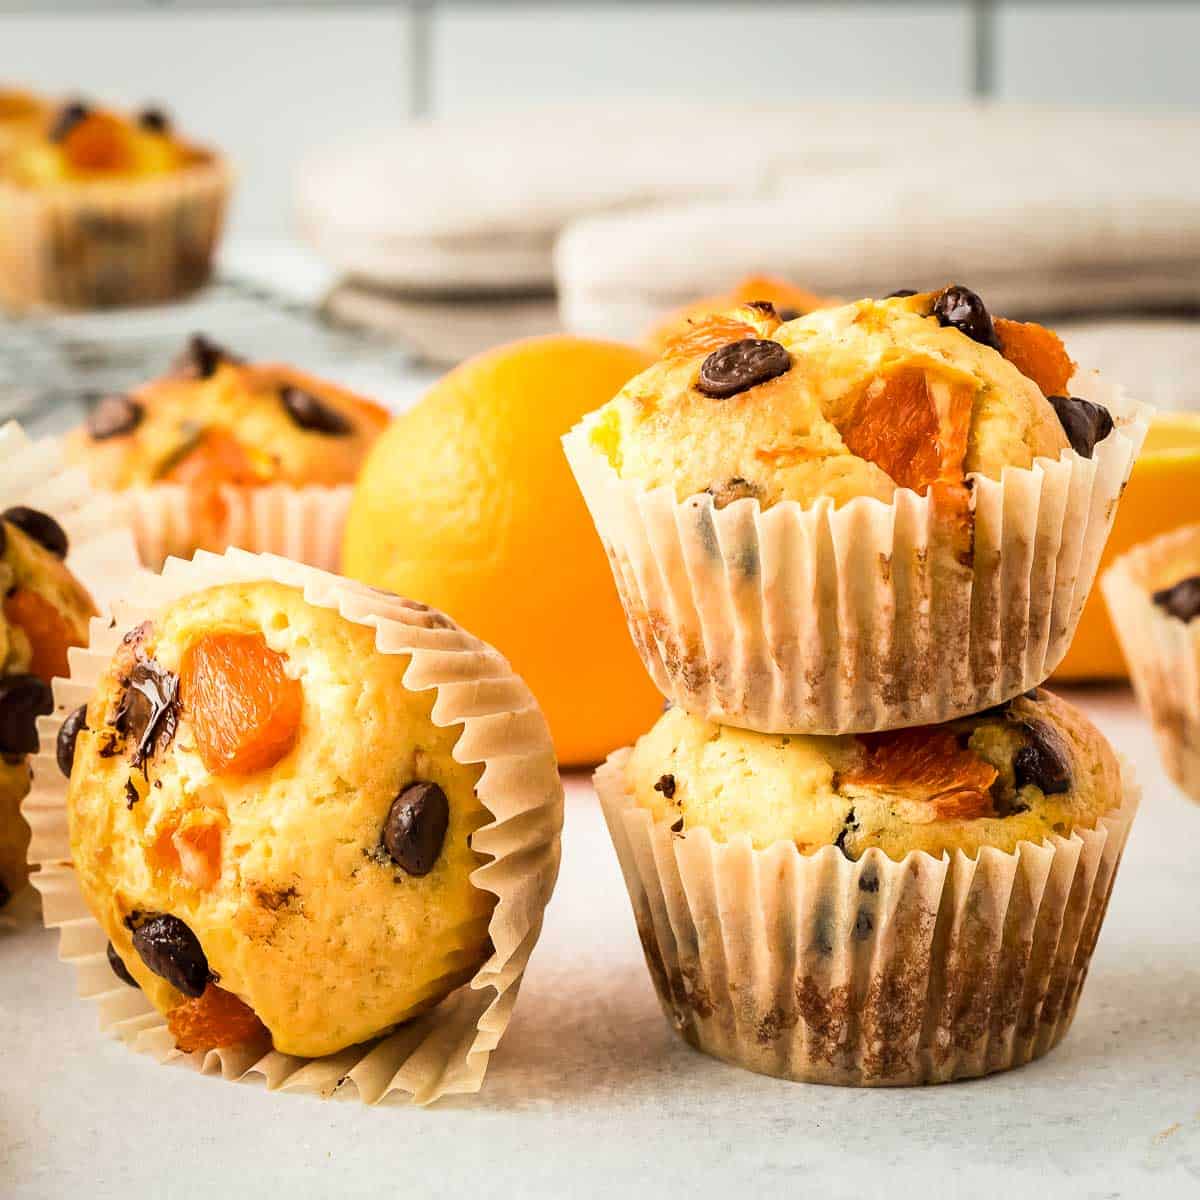 Side view of two stacked muffins and one turned on its side on a white surface with an orange and more muffins in the background.